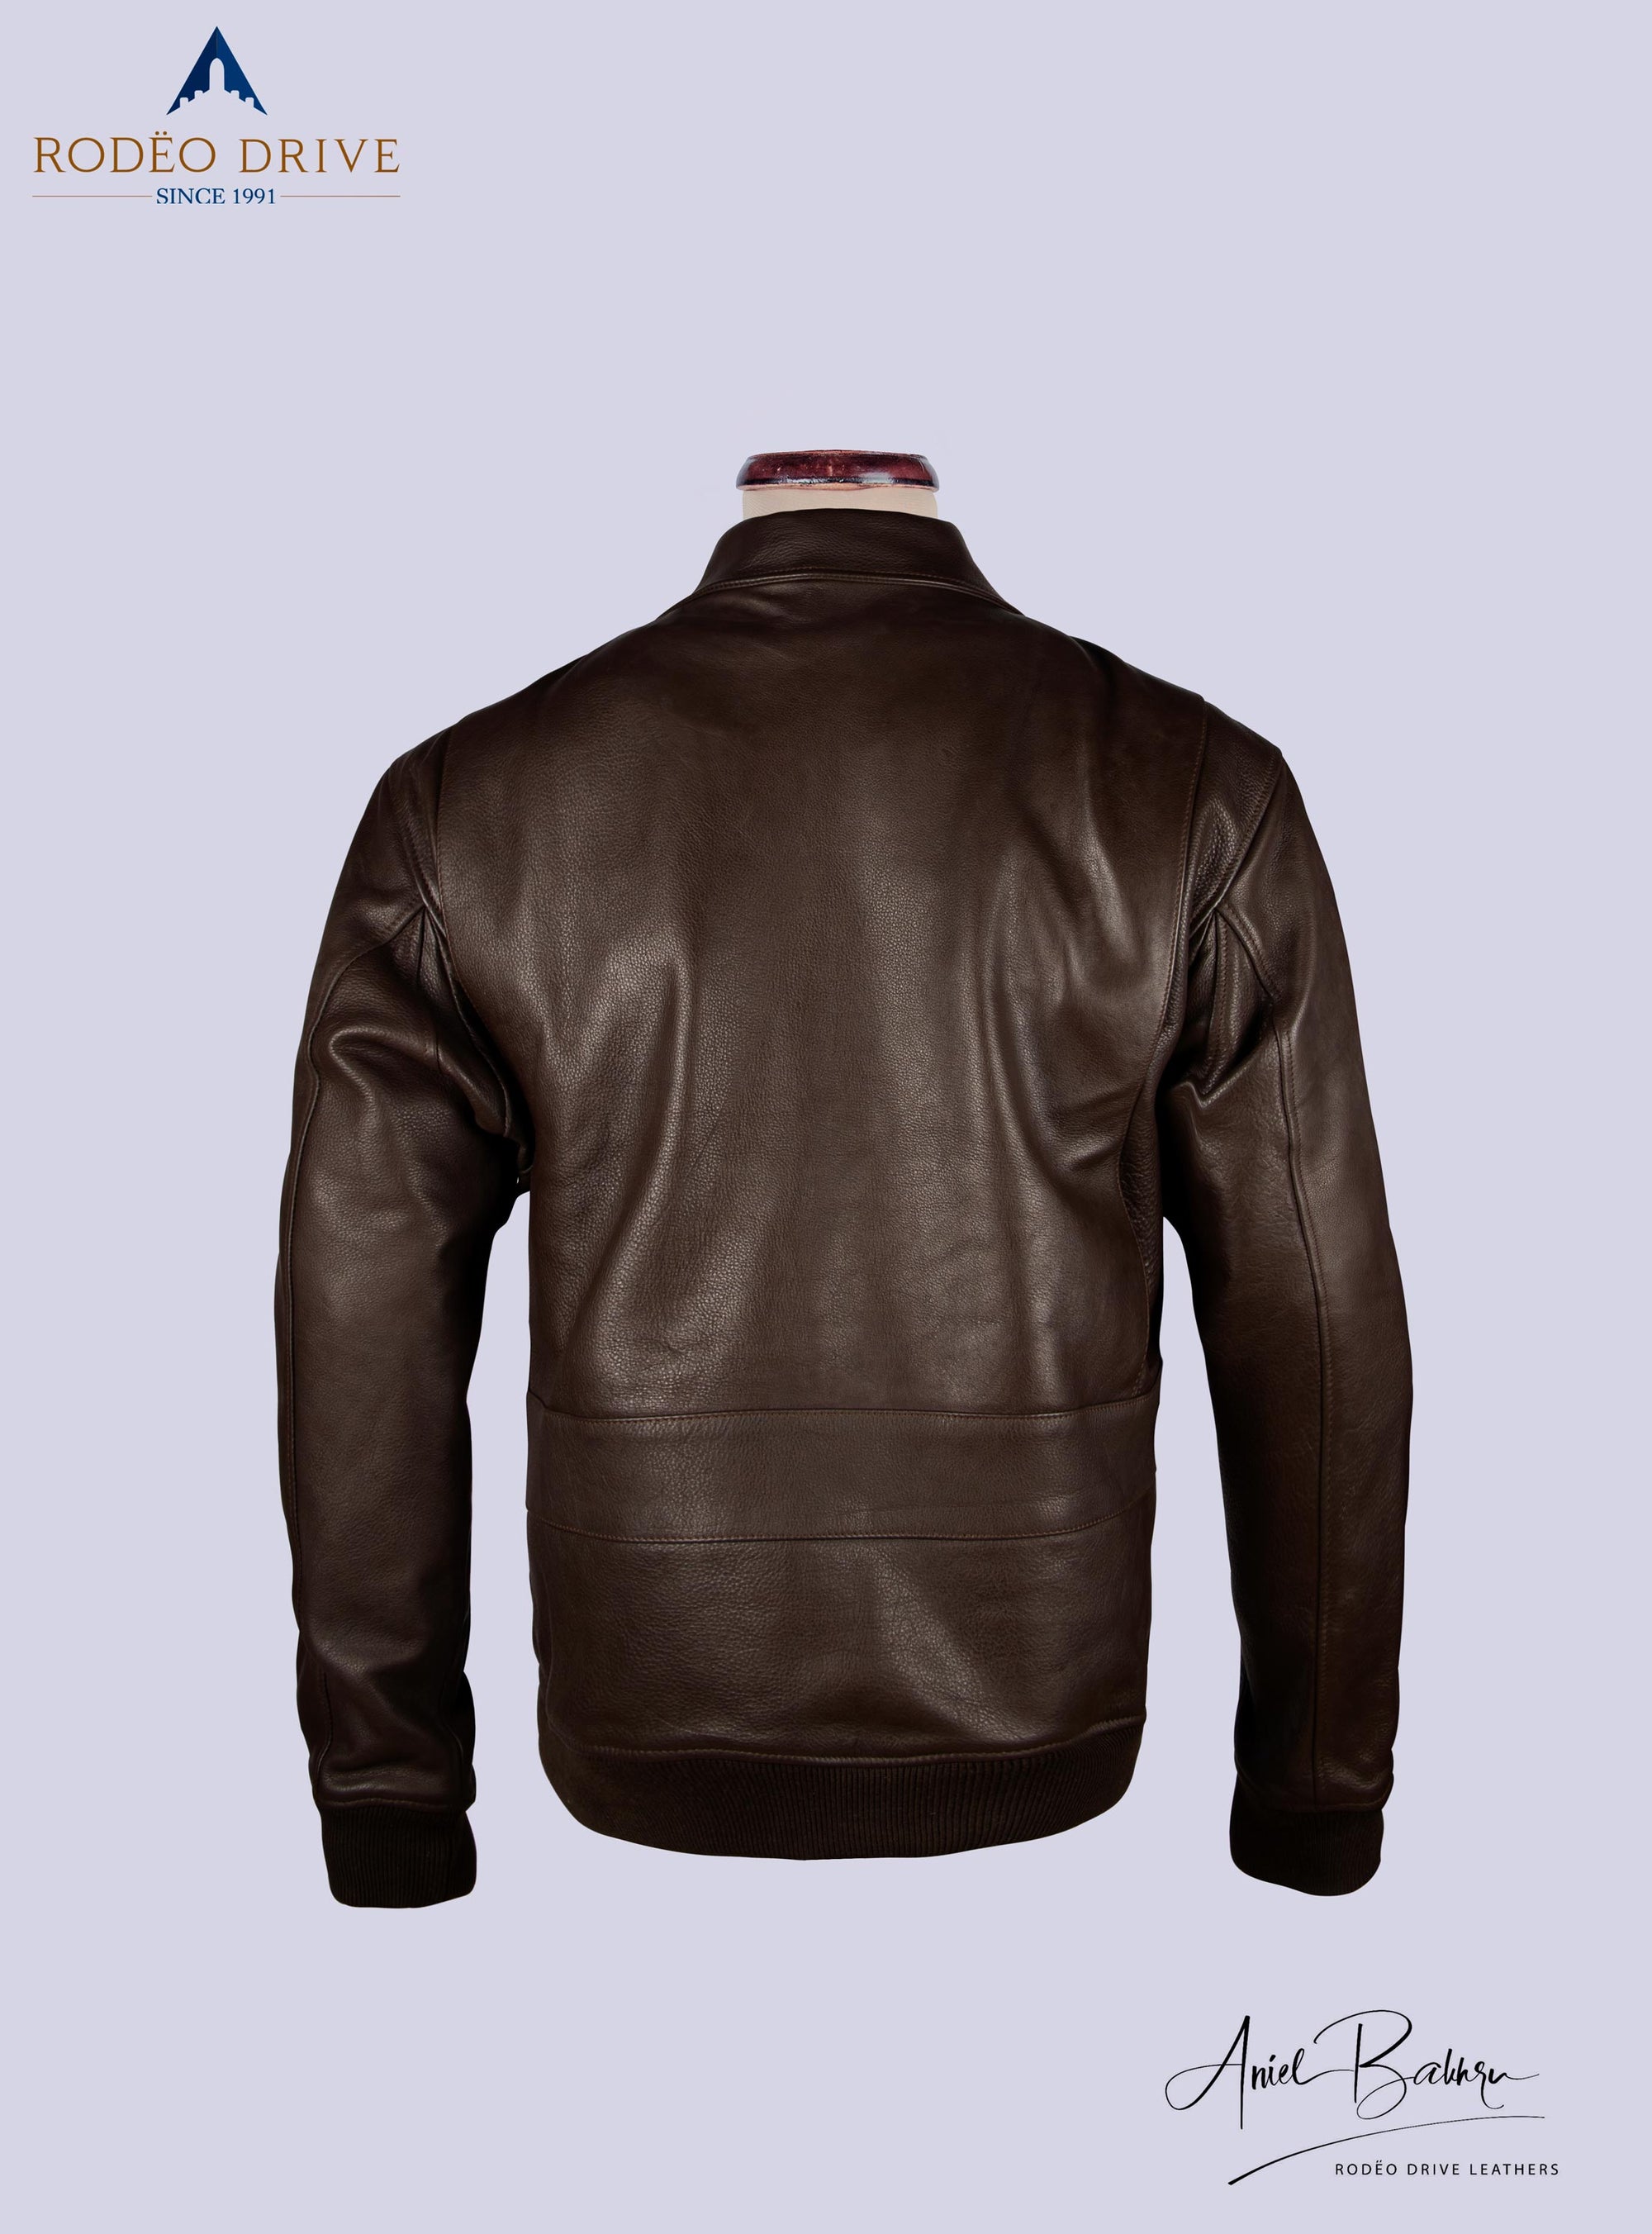 back view of B2 bomber jacket